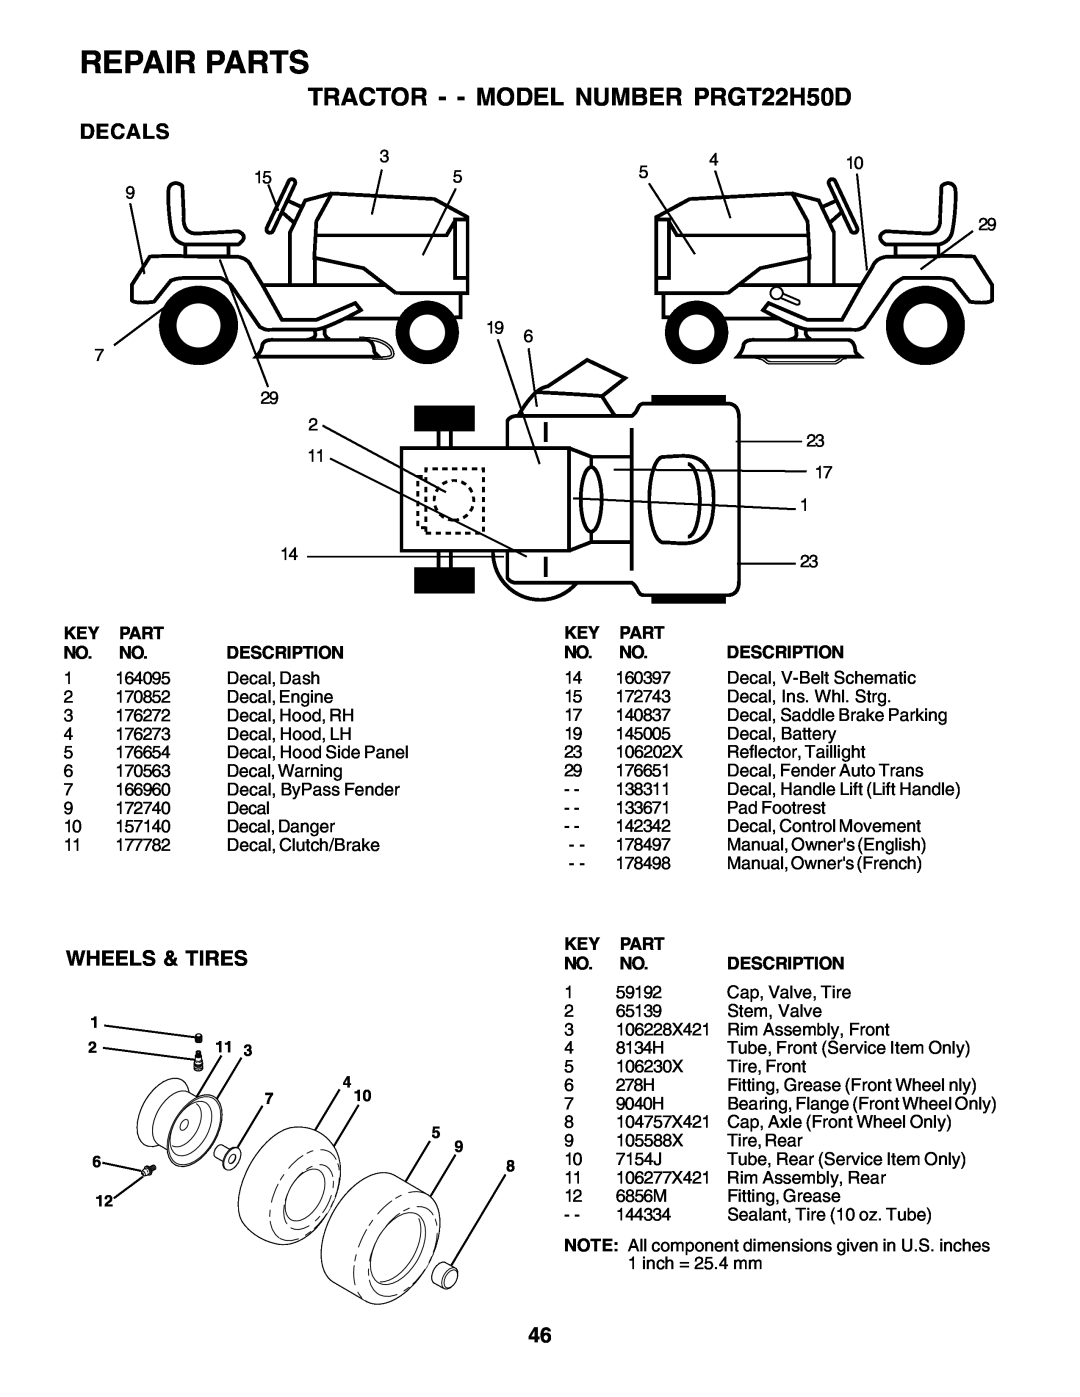 Poulan 178497 owner manual Repair Parts, TRACTOR - - MODEL NUMBER PRGT22H50D, Decals, Wheels & Tires 